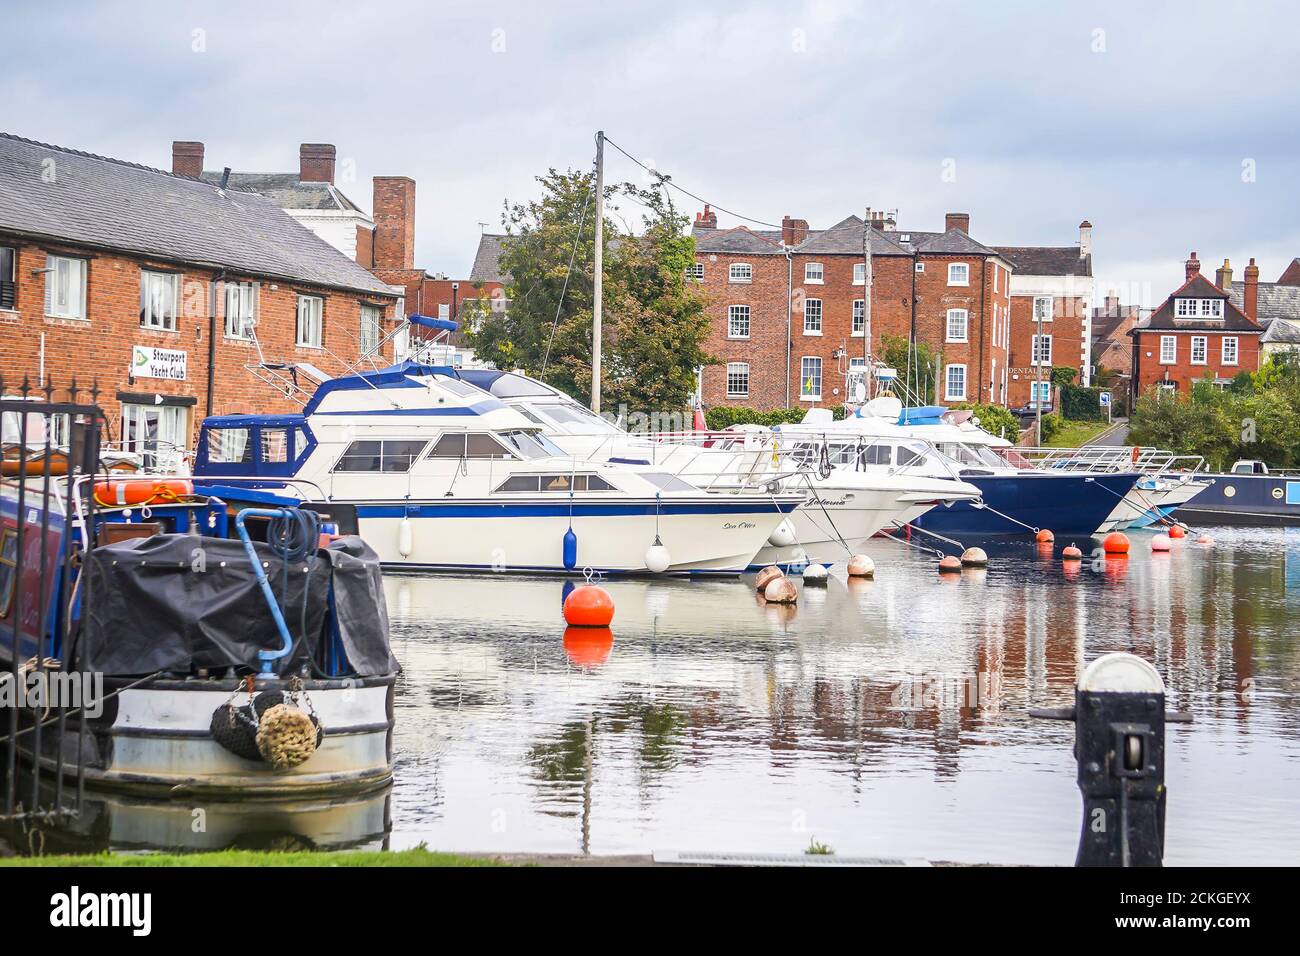 Boats moored in Stourport-on-Severn basin, Worcestershire, UK. Stock Photo